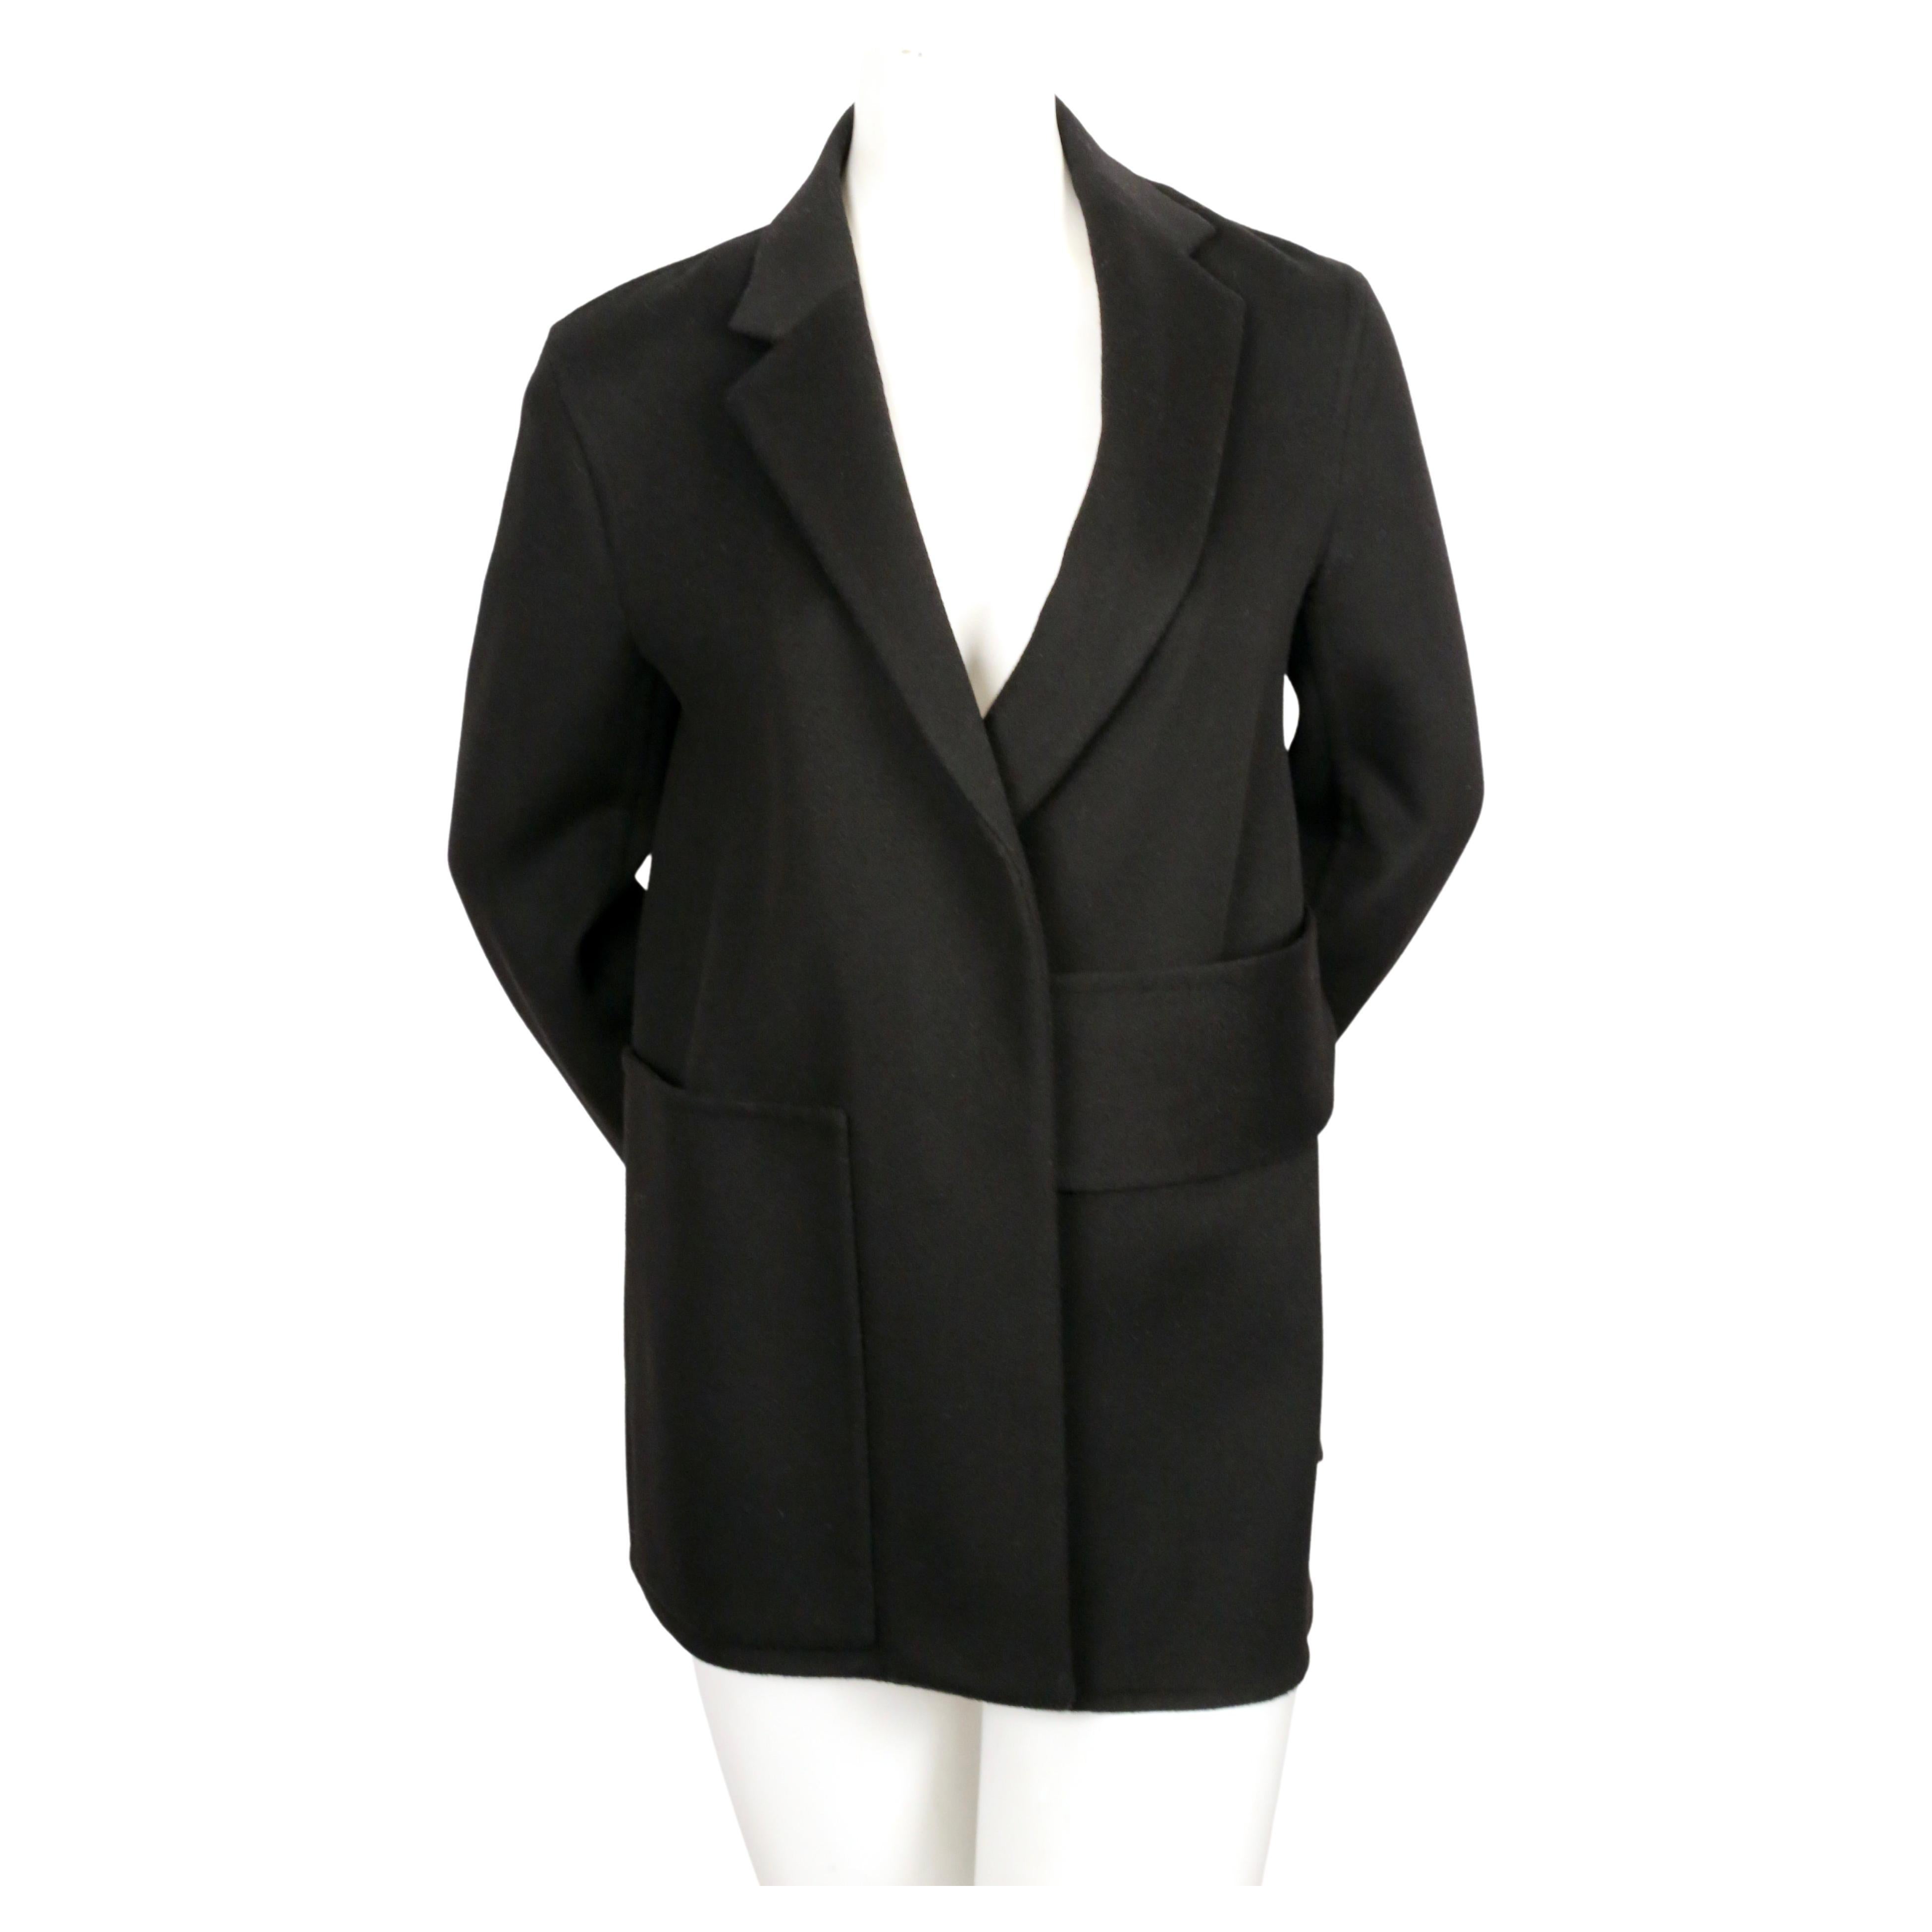 Black double-faced wool and cashmere jacket with wrap around asymmetrical belt  and single patch pocket designed by Phoebe Philo for Celine. French size 40. Approximate measurements: shoulder 16